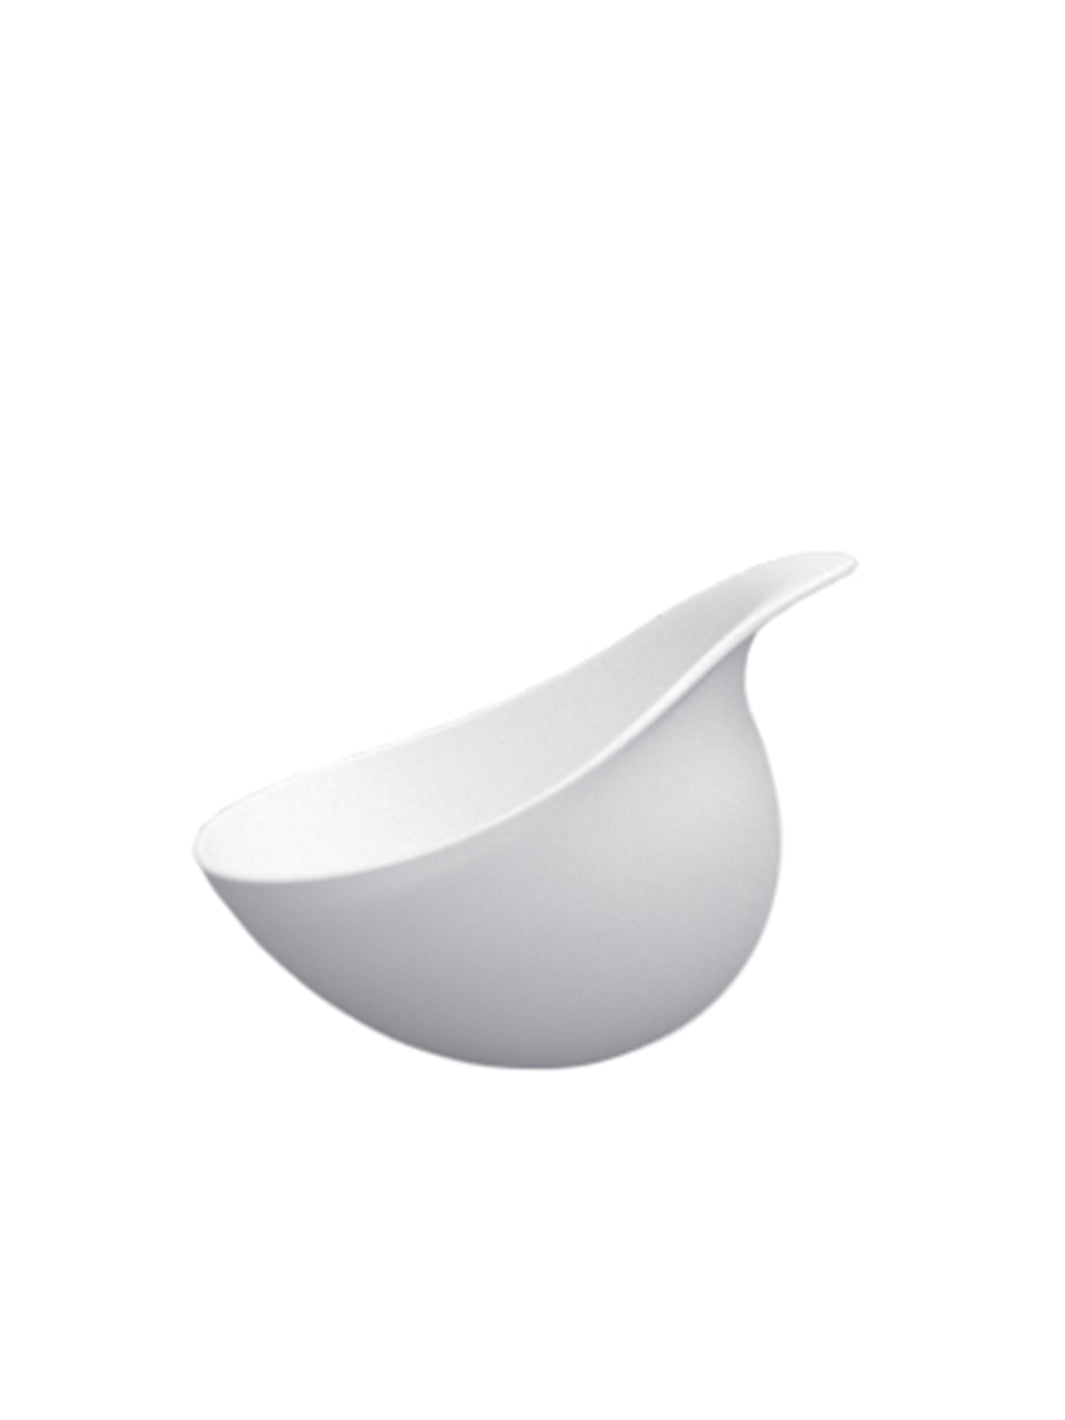 COOKPLAY The Tablet The Nest Small Bowl (12x10cm/4.7x4in)